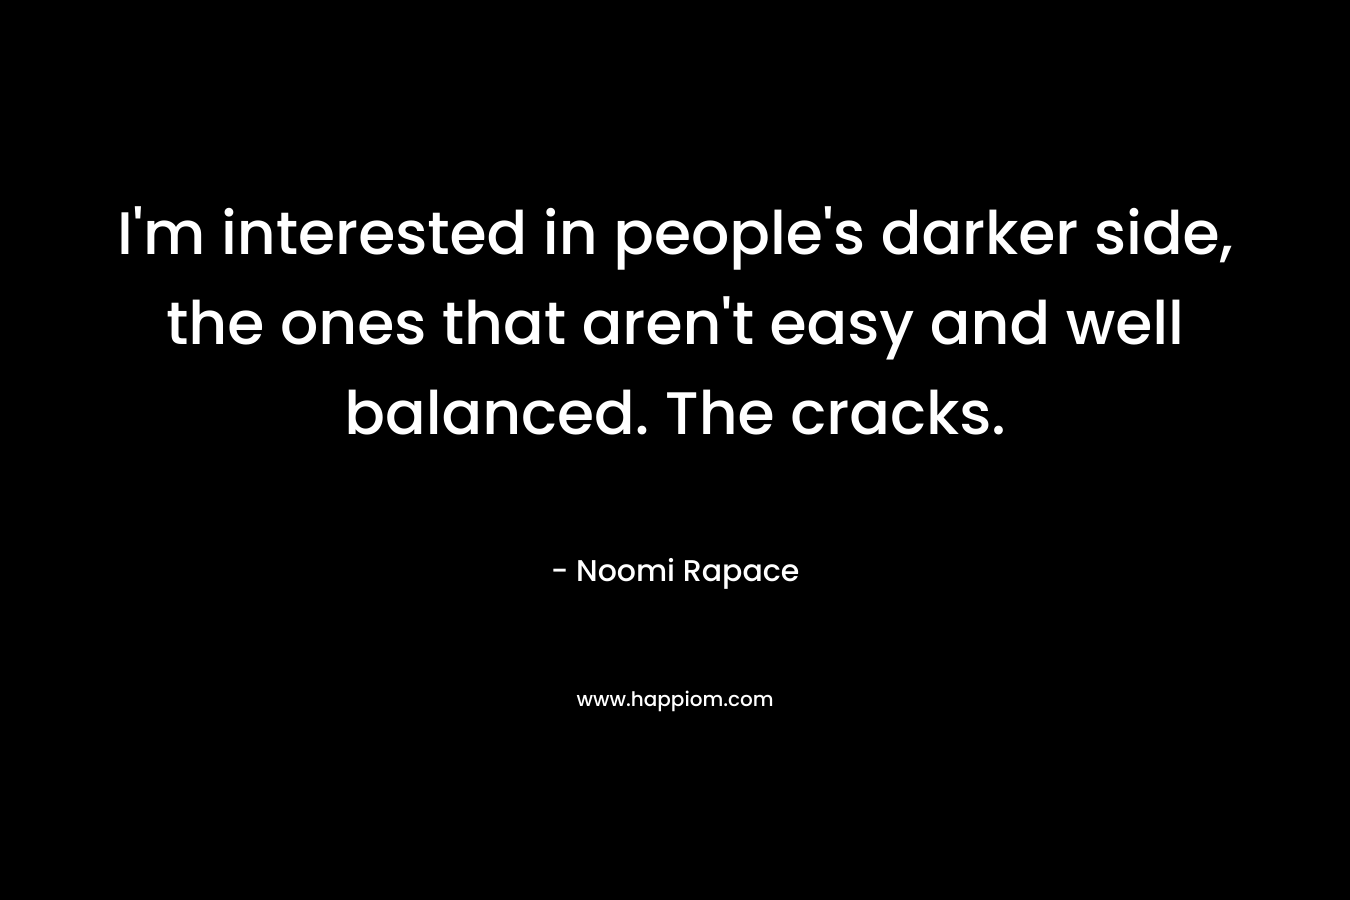 I’m interested in people’s darker side, the ones that aren’t easy and well balanced. The cracks. – Noomi Rapace